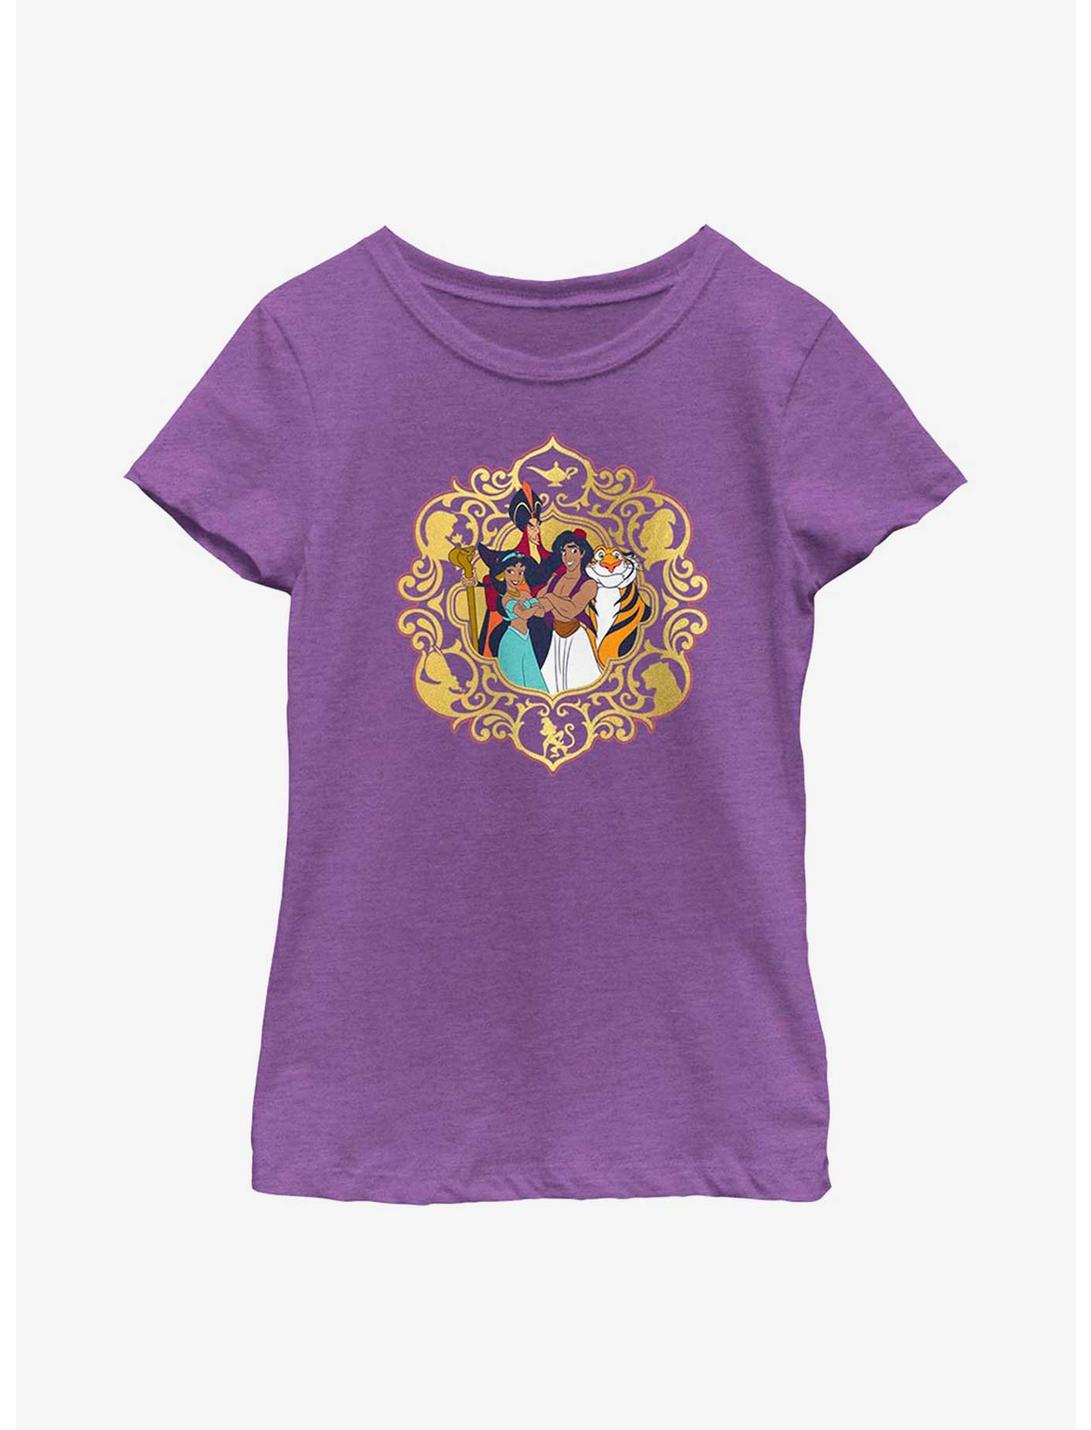 Disney Aladdin 30th Anniversary Group Together Framed Youth Girls T-Shirt, PURPLE BERRY, hi-res